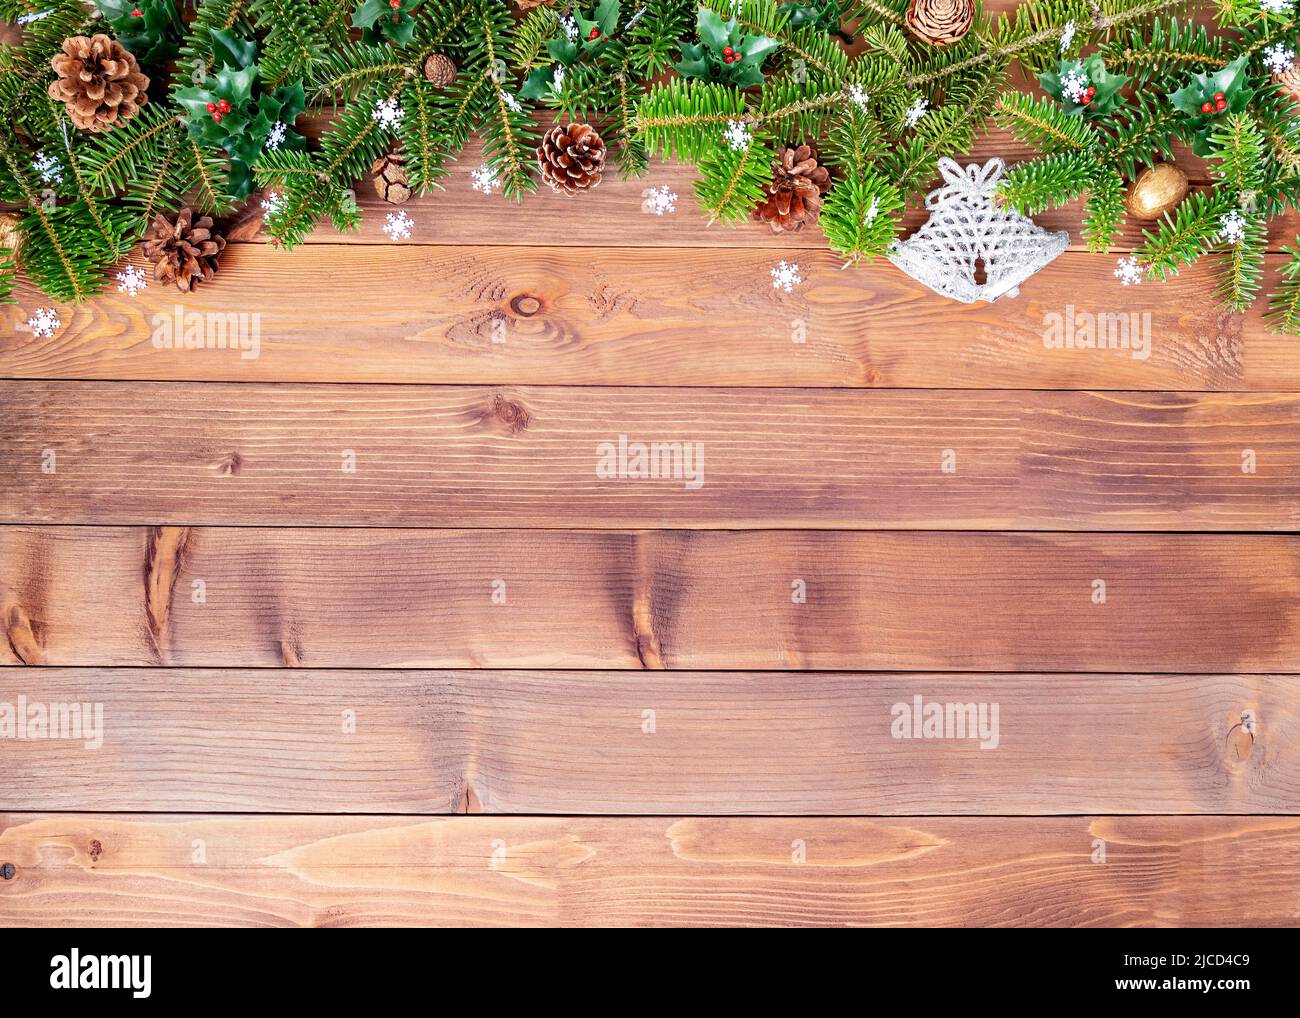 Christmas background with fir branches, cones, snowflakes and decorations Stock Photo